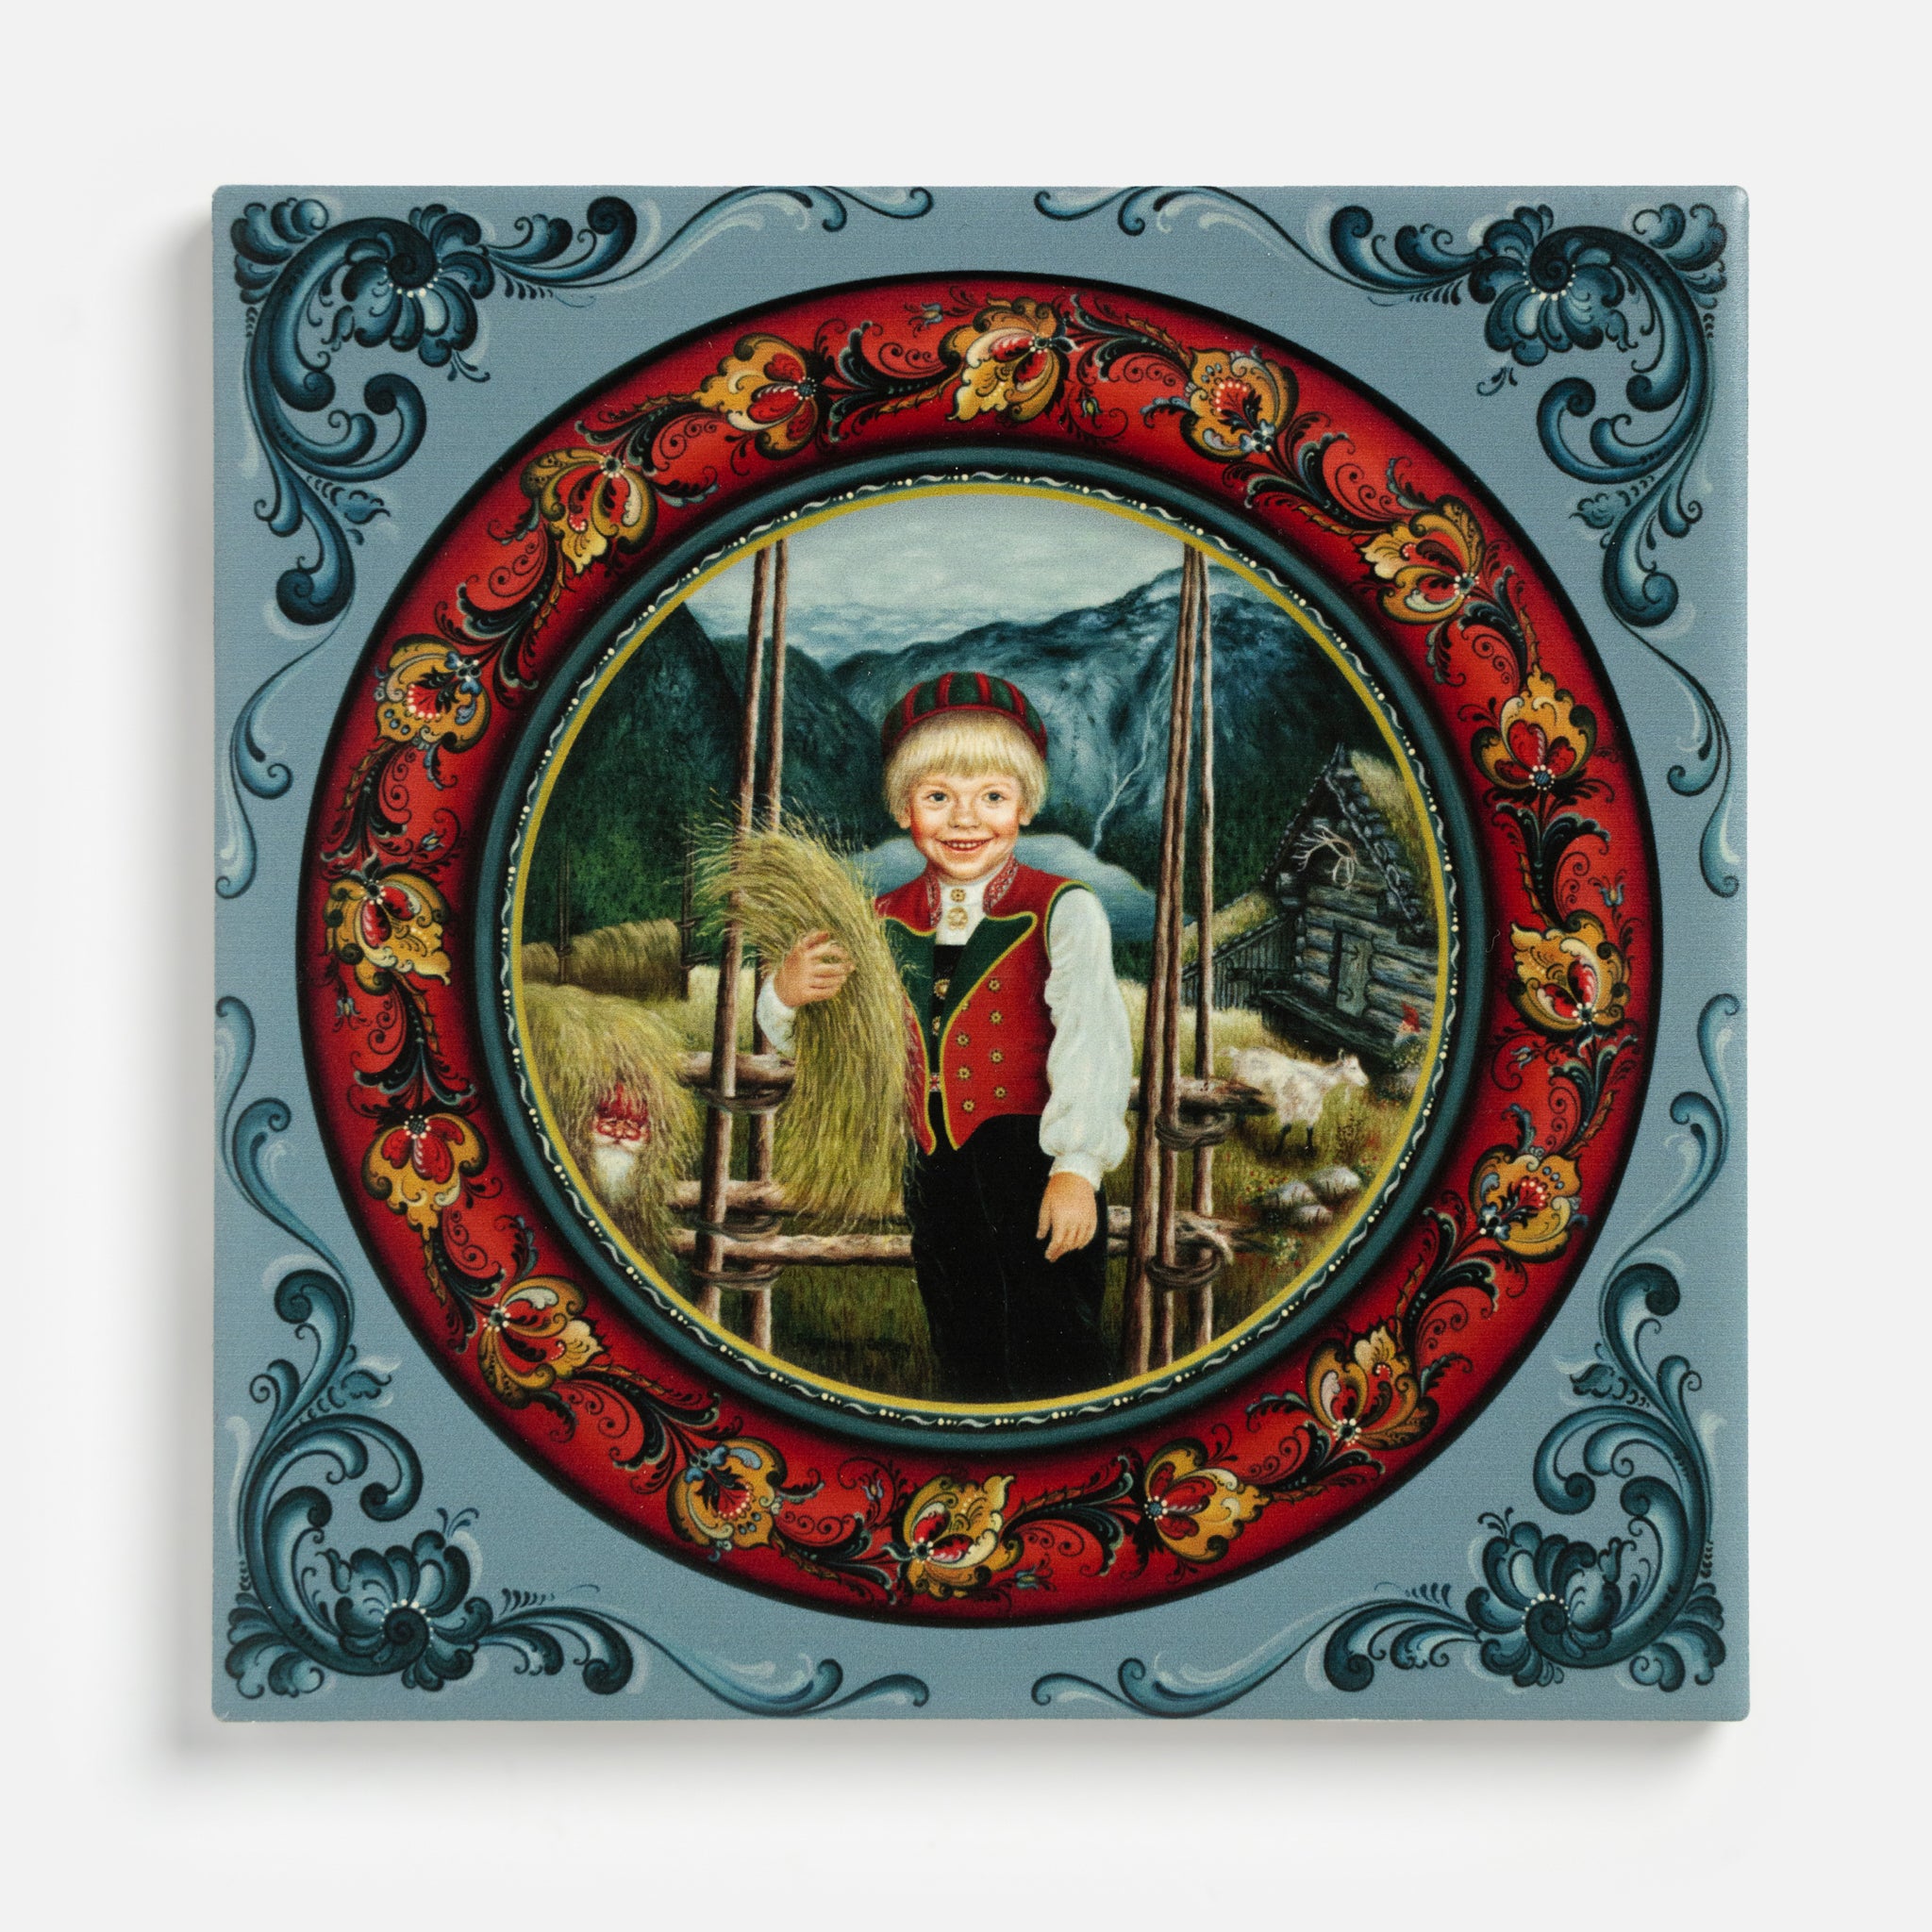 Bjorn with Hay – Trivet Designed By Suzanne Toftey